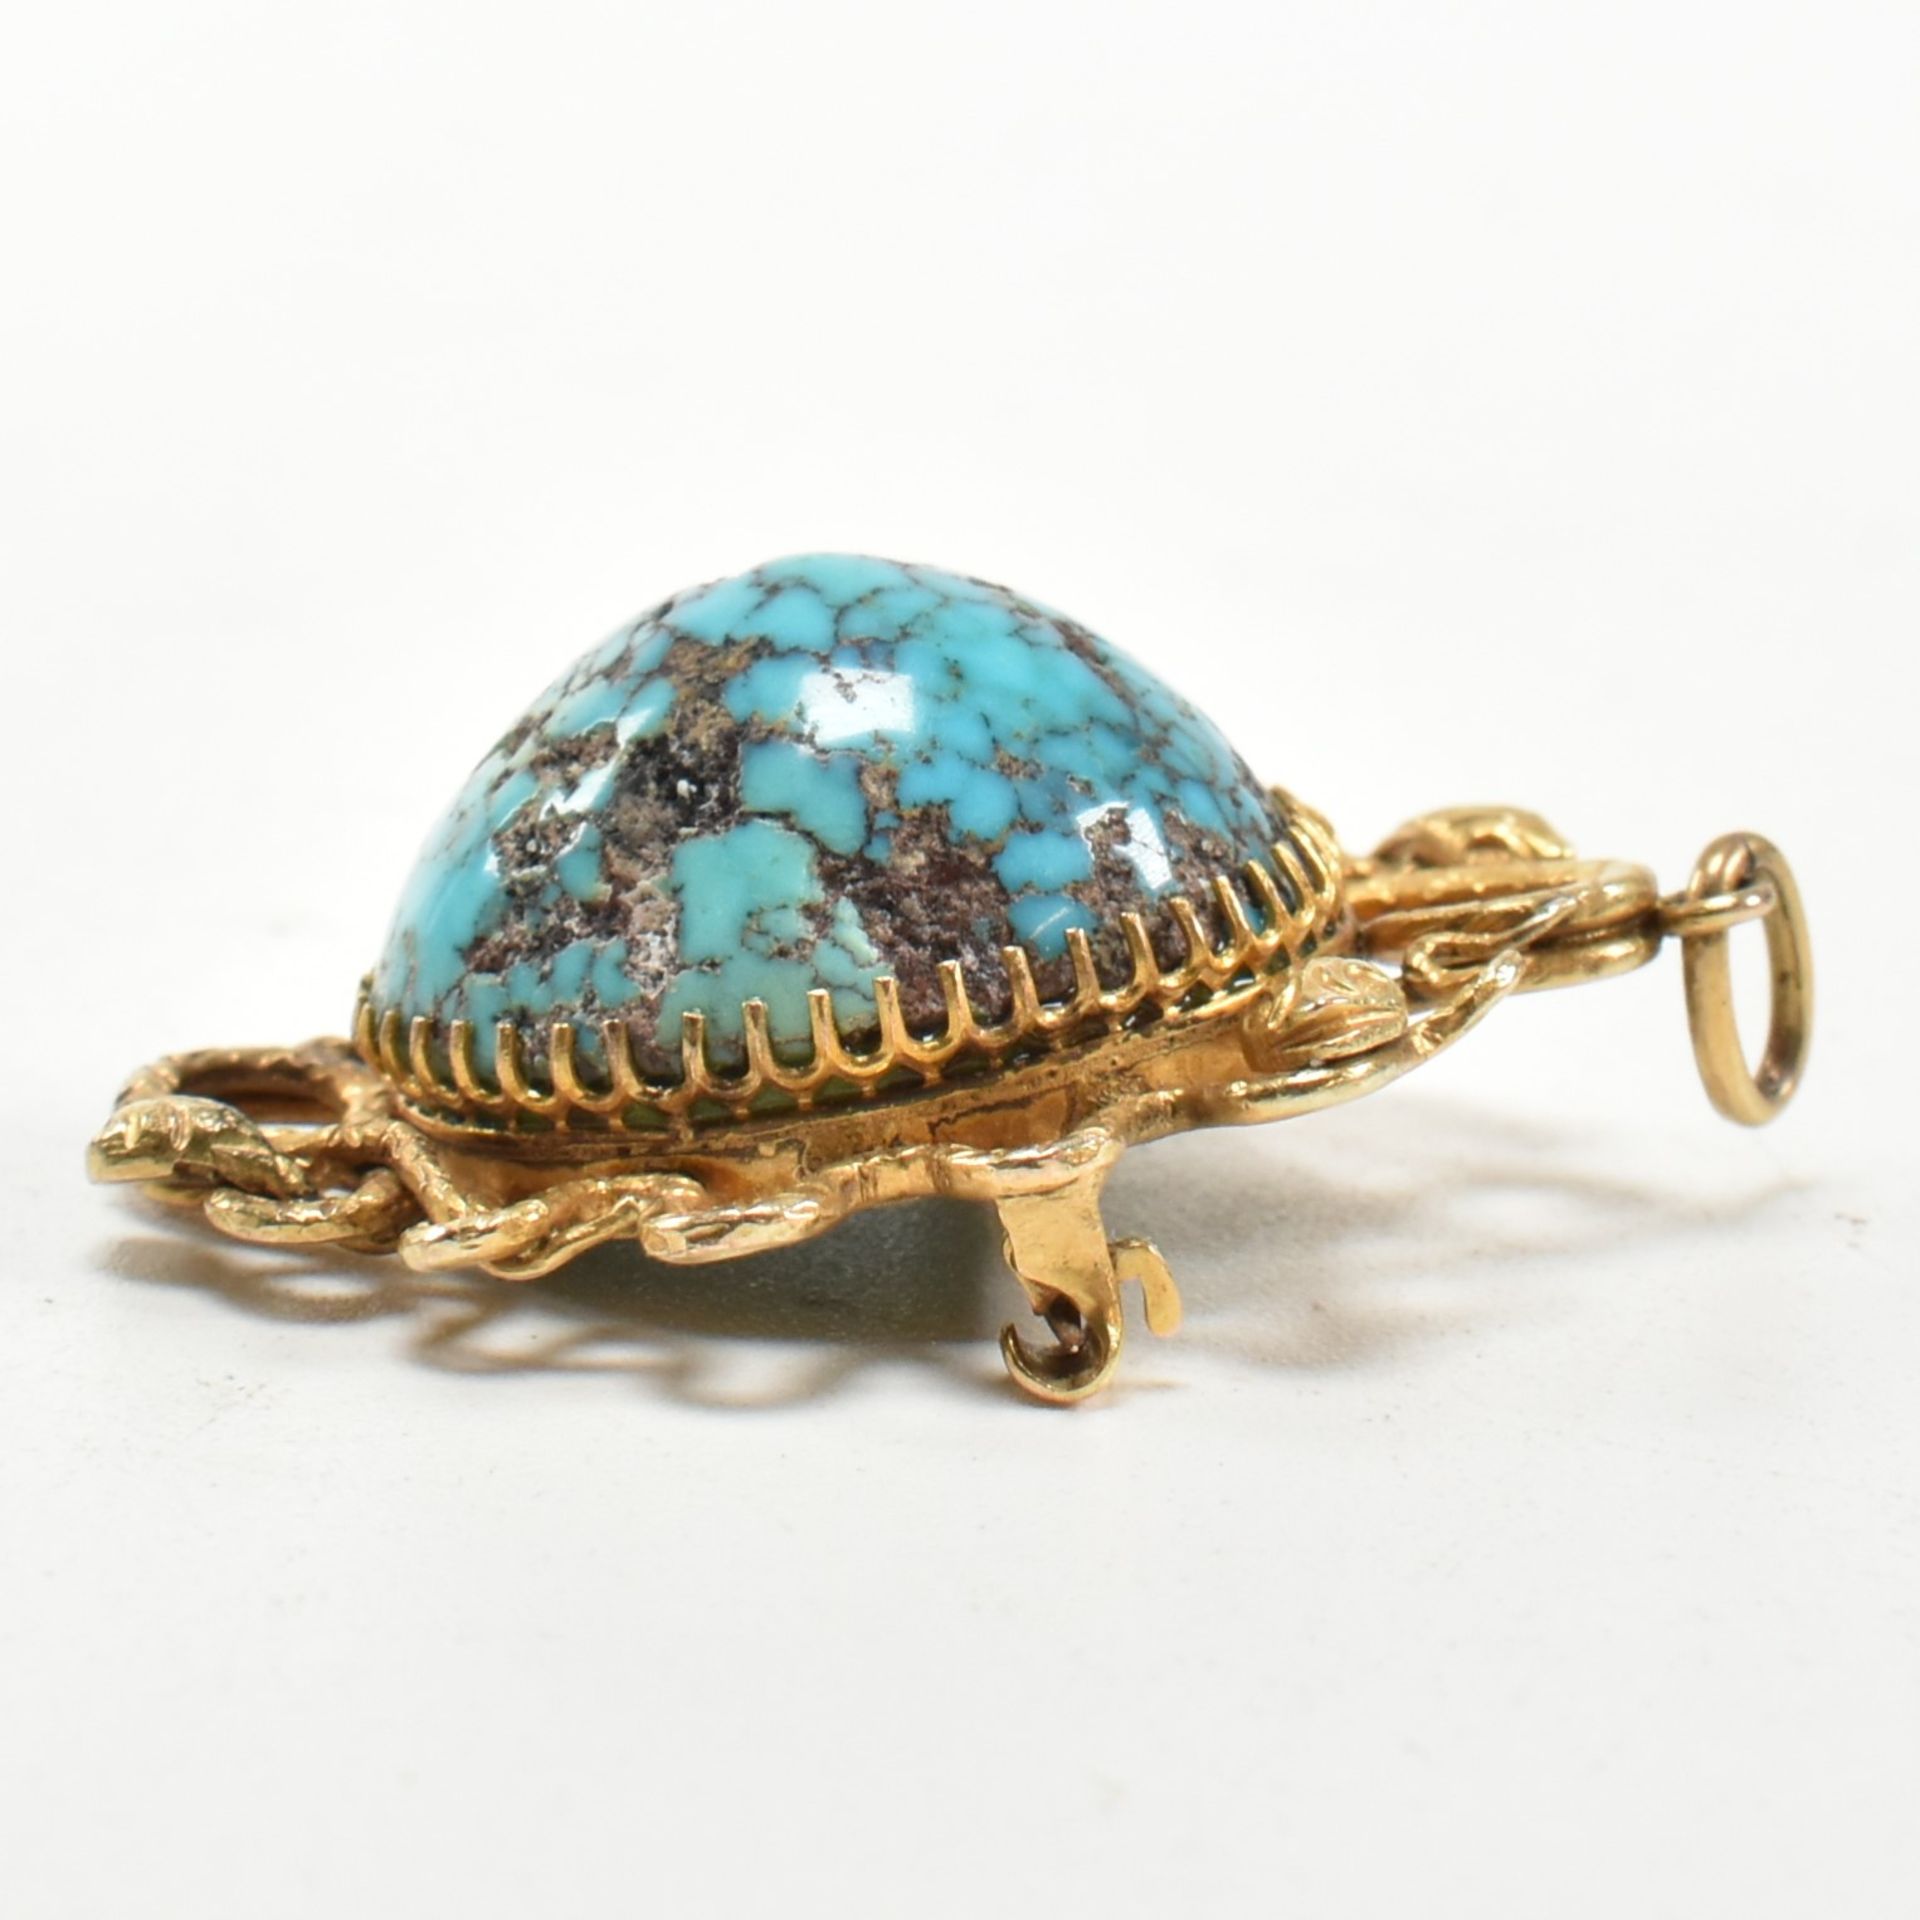 ARTS & CRAFTS GOLD TURQUOISE SNAKE PENDANT BROOCH PIN - Image 2 of 7